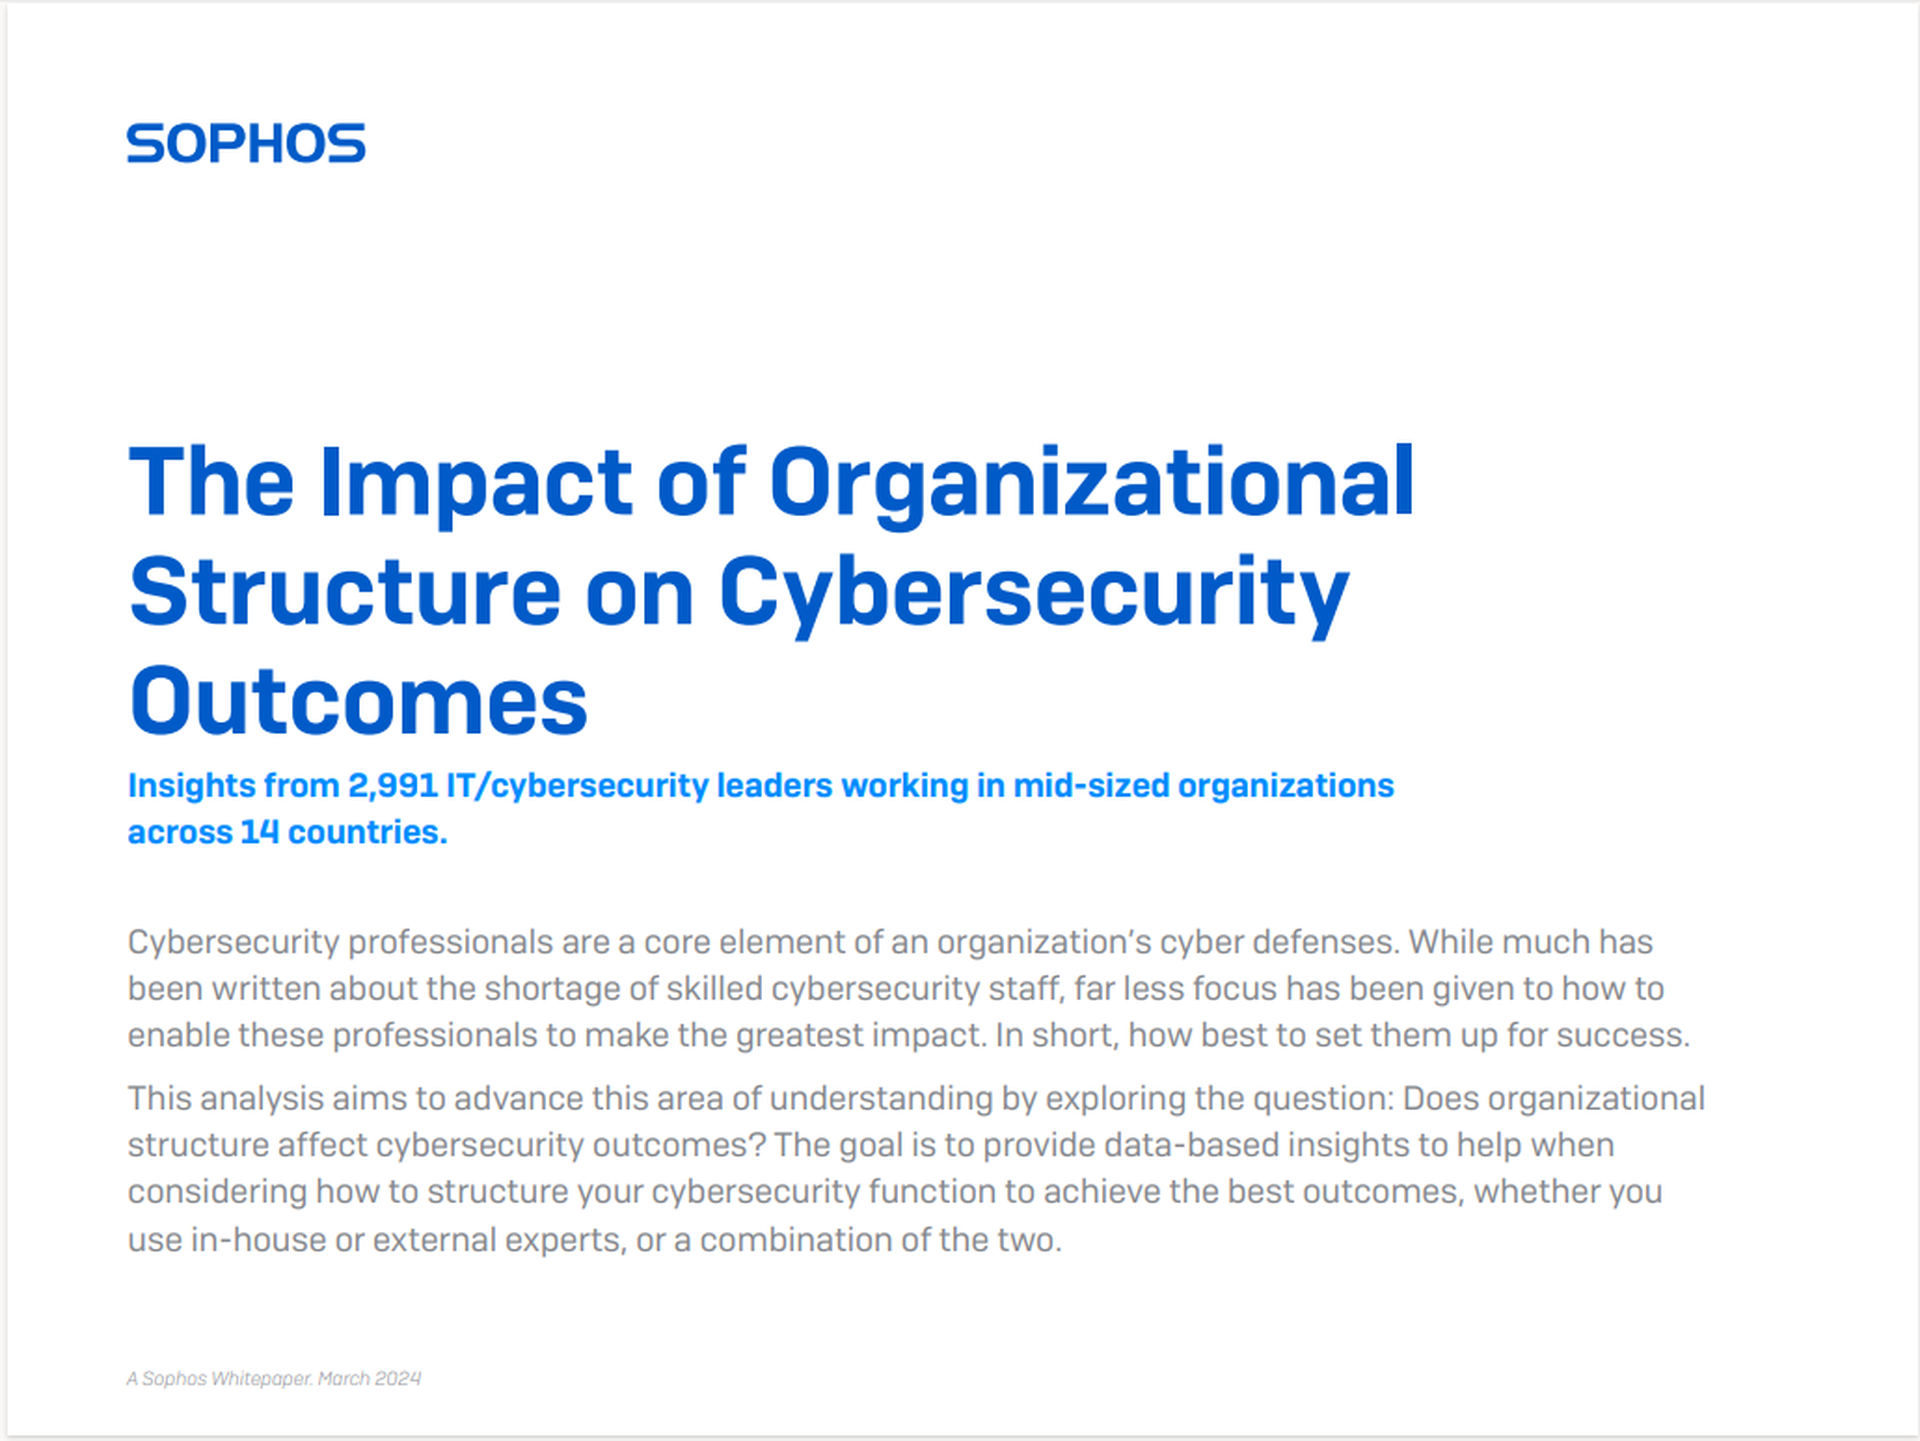 The Impact of Organizational Structure on Cybersecurity Outcomes